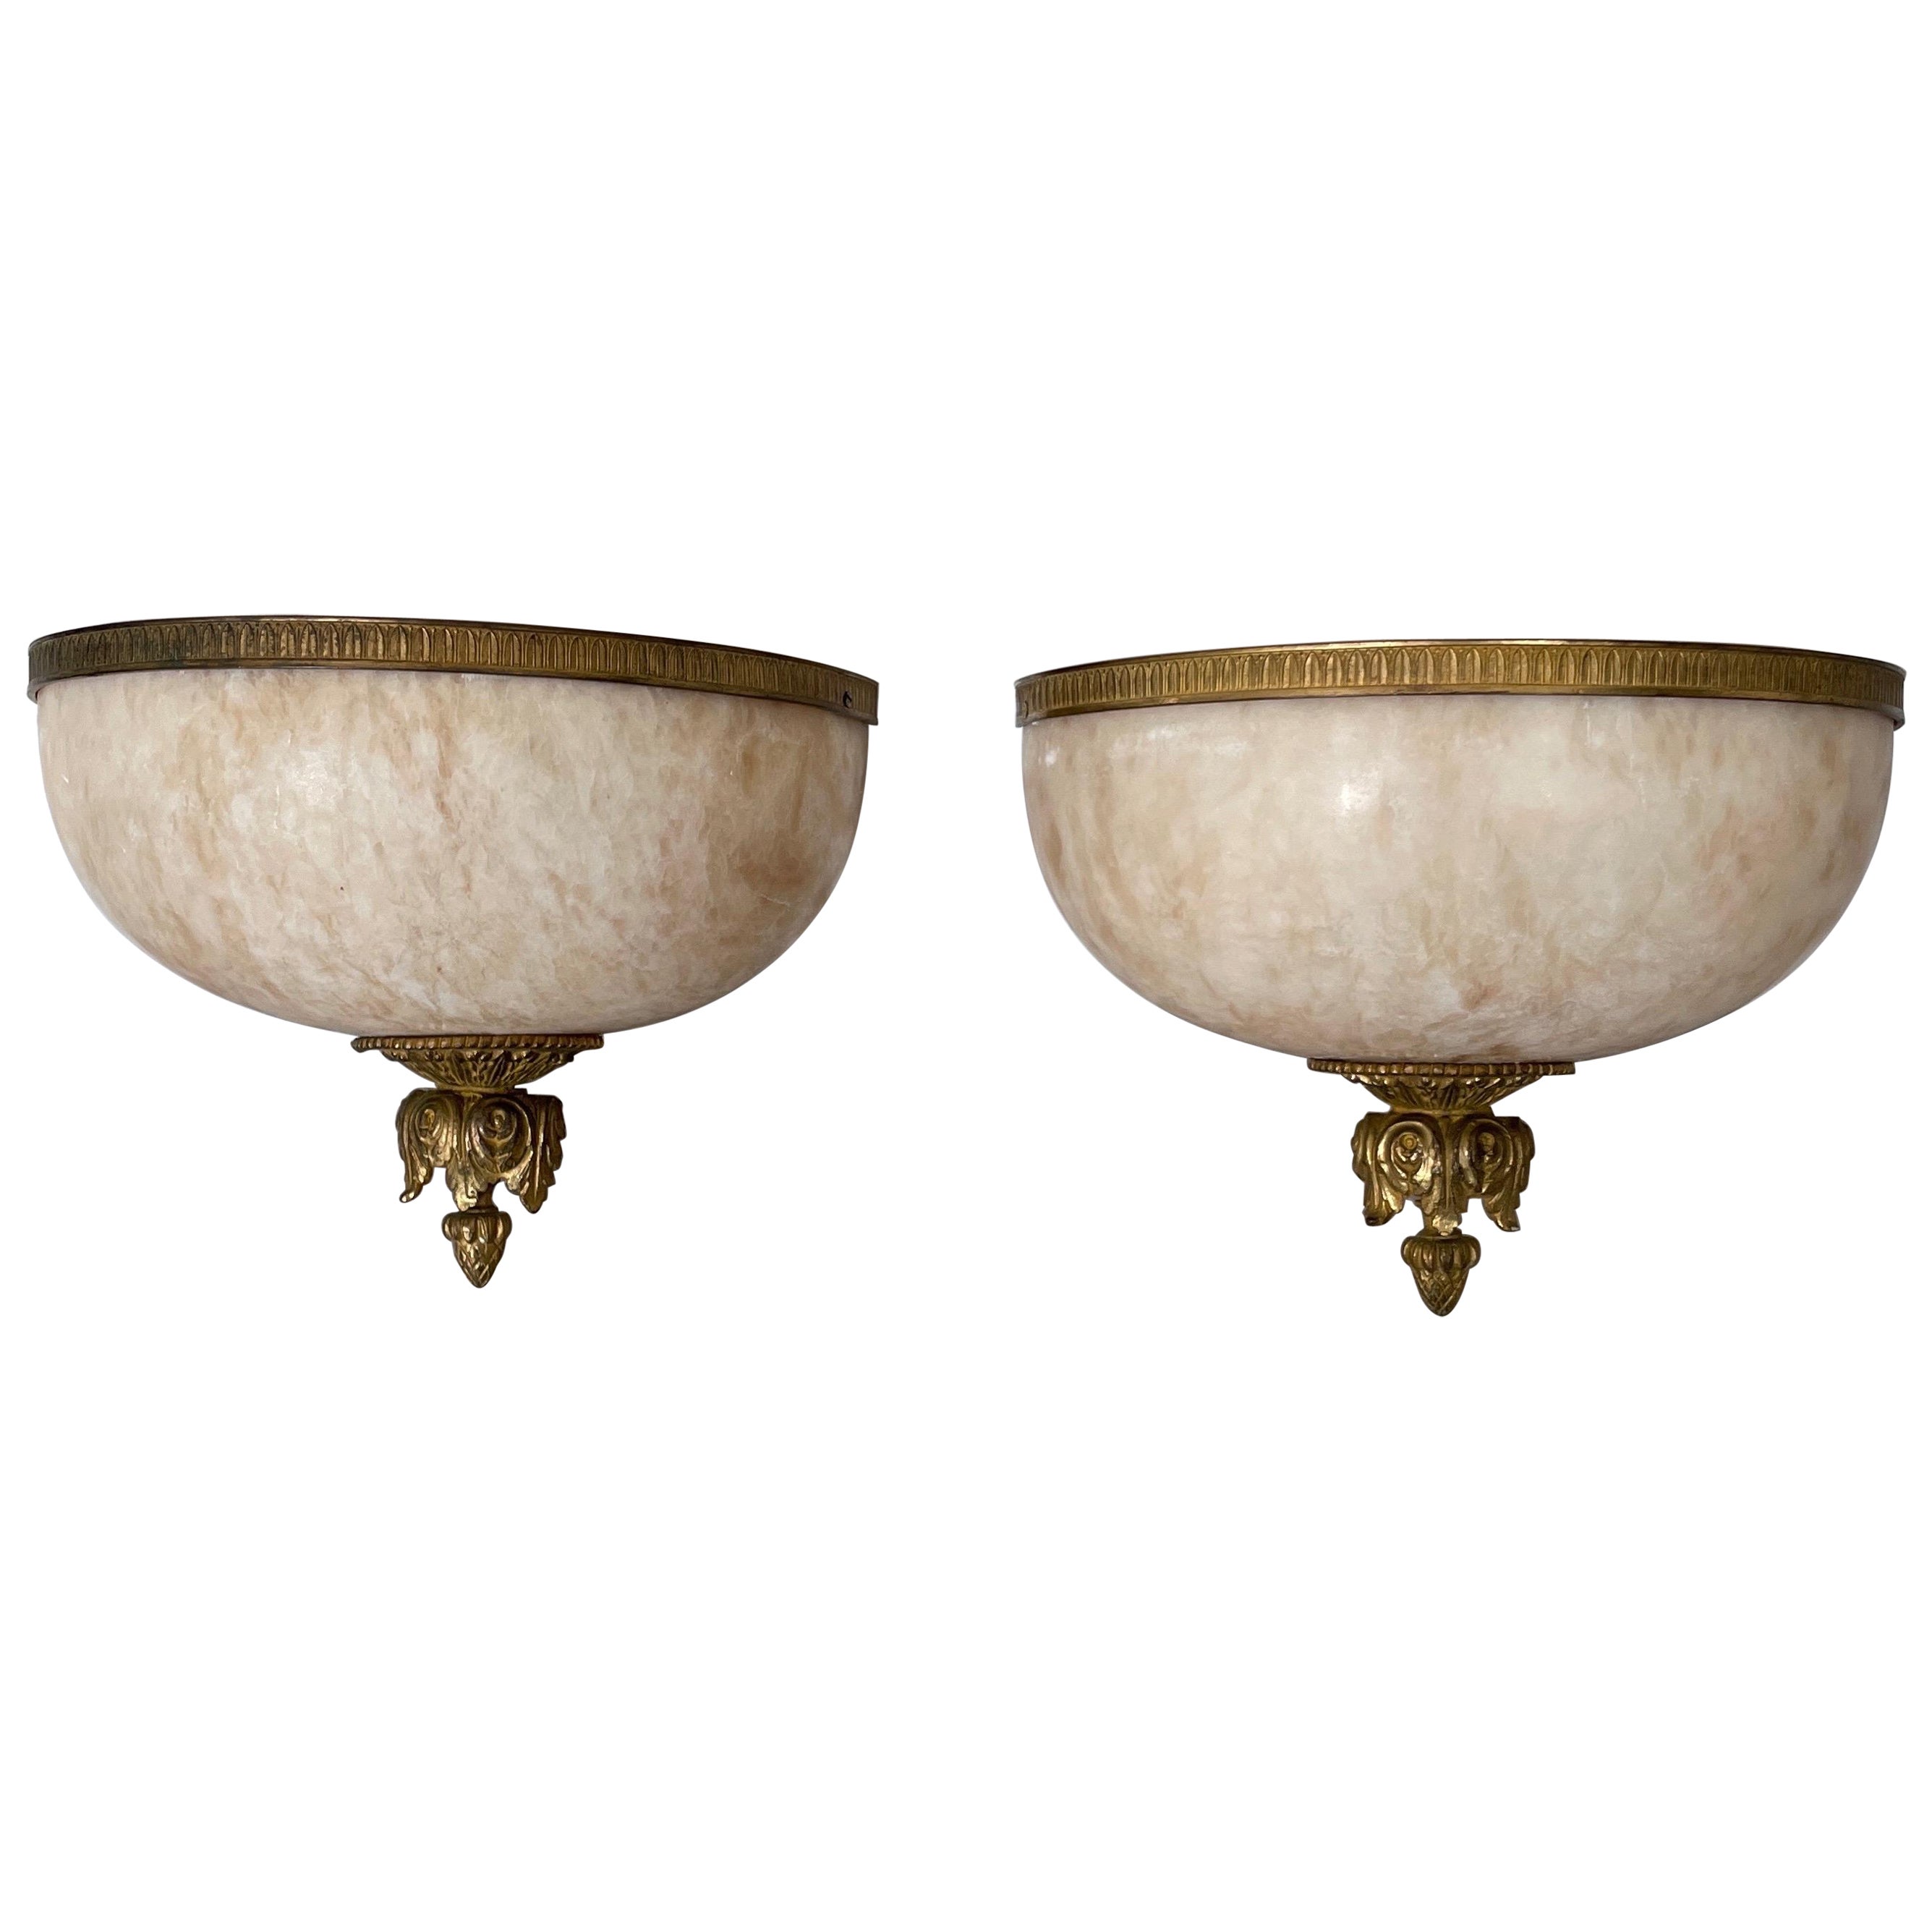 Pair of Neoclassical French Alabaster & Bronze Wall Mounted Sconces